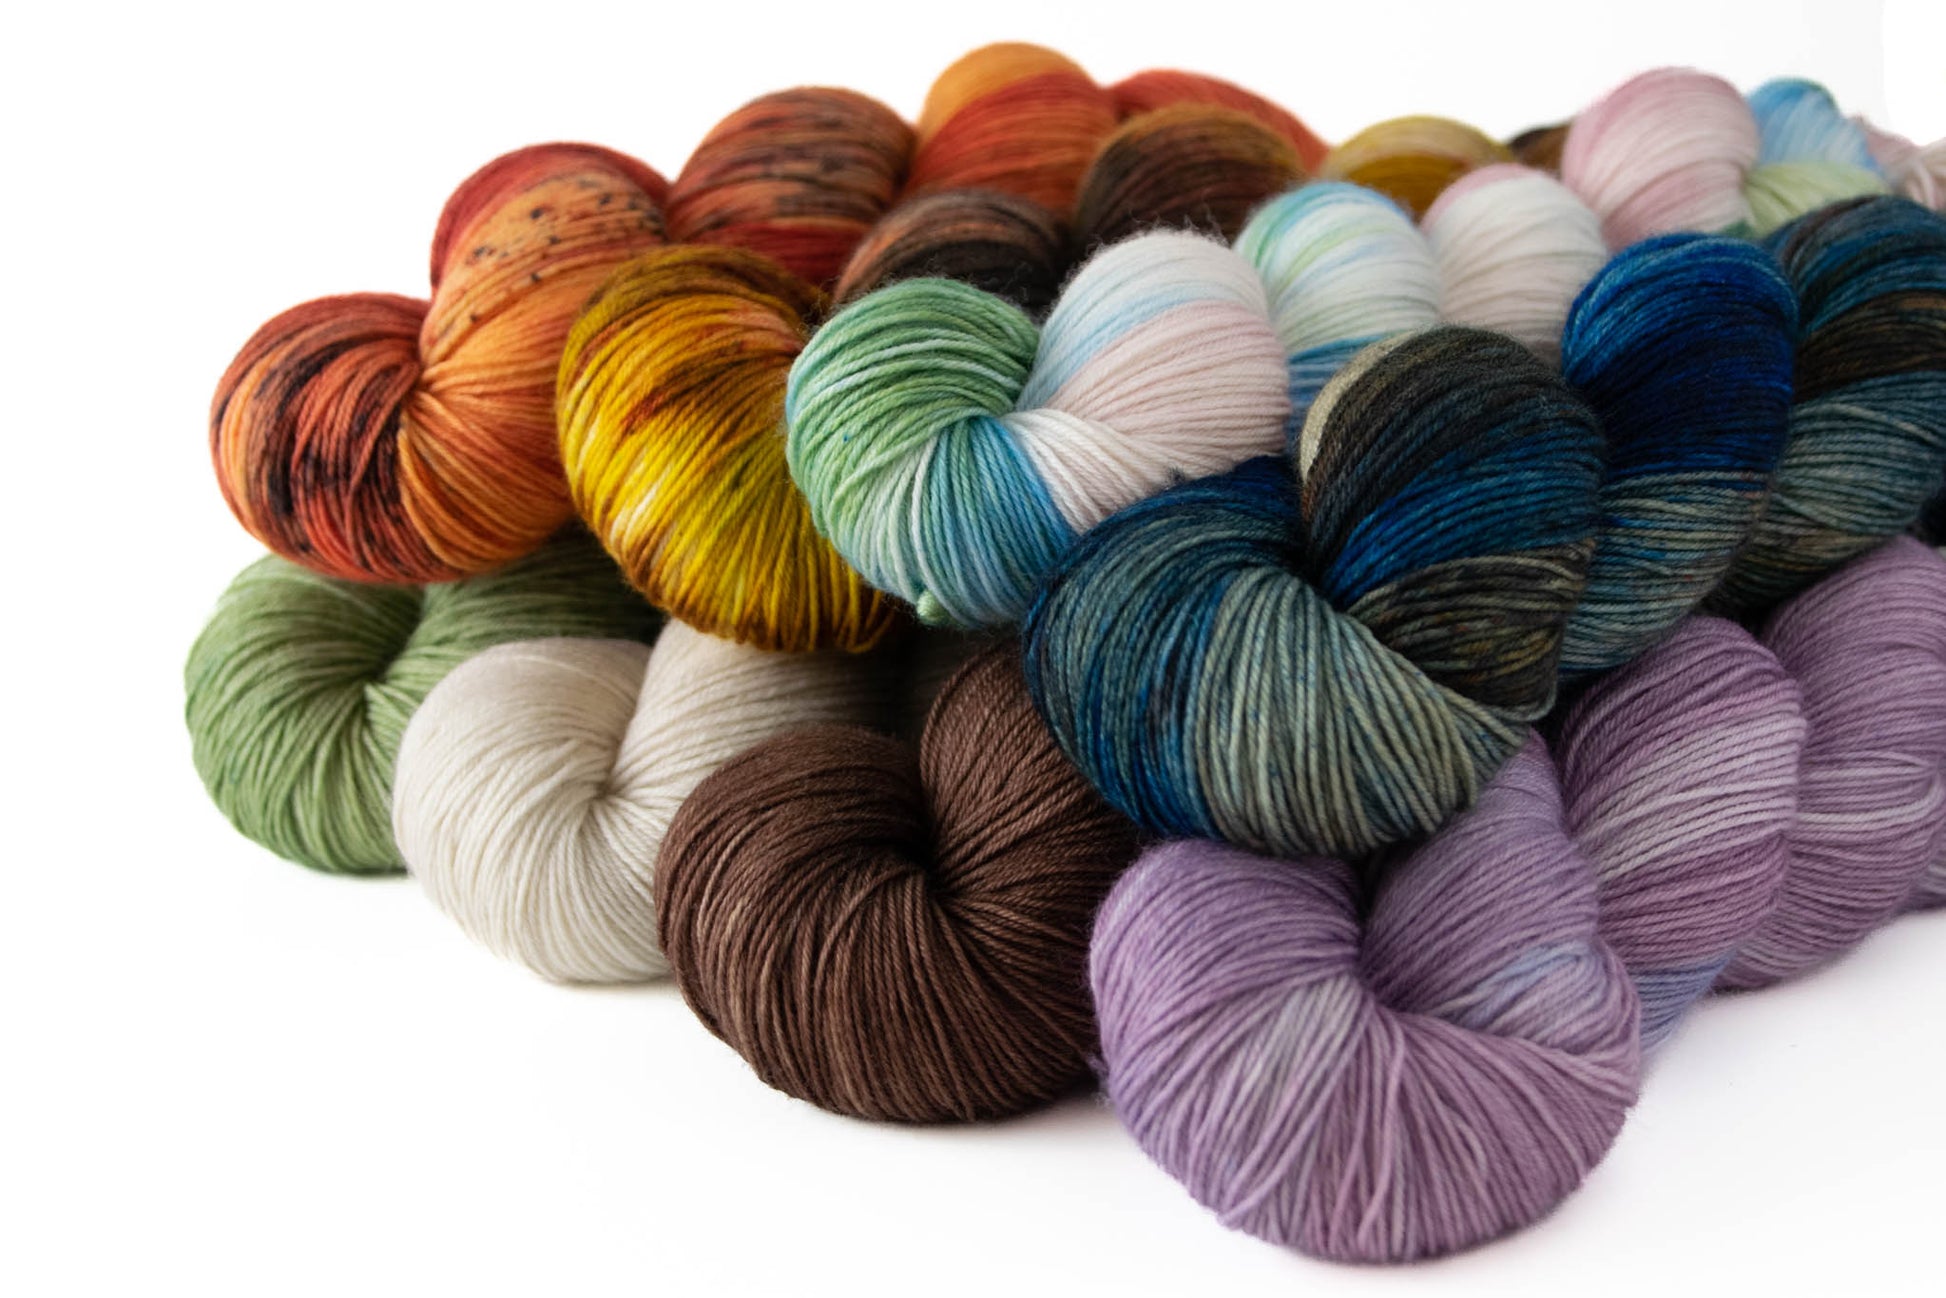 Eight skeins in the collection stacked on top of each other: red and orange; brown and yellow; green, blue, pink, and white; blue, orange, and brown; green; cream; brown; and purple.